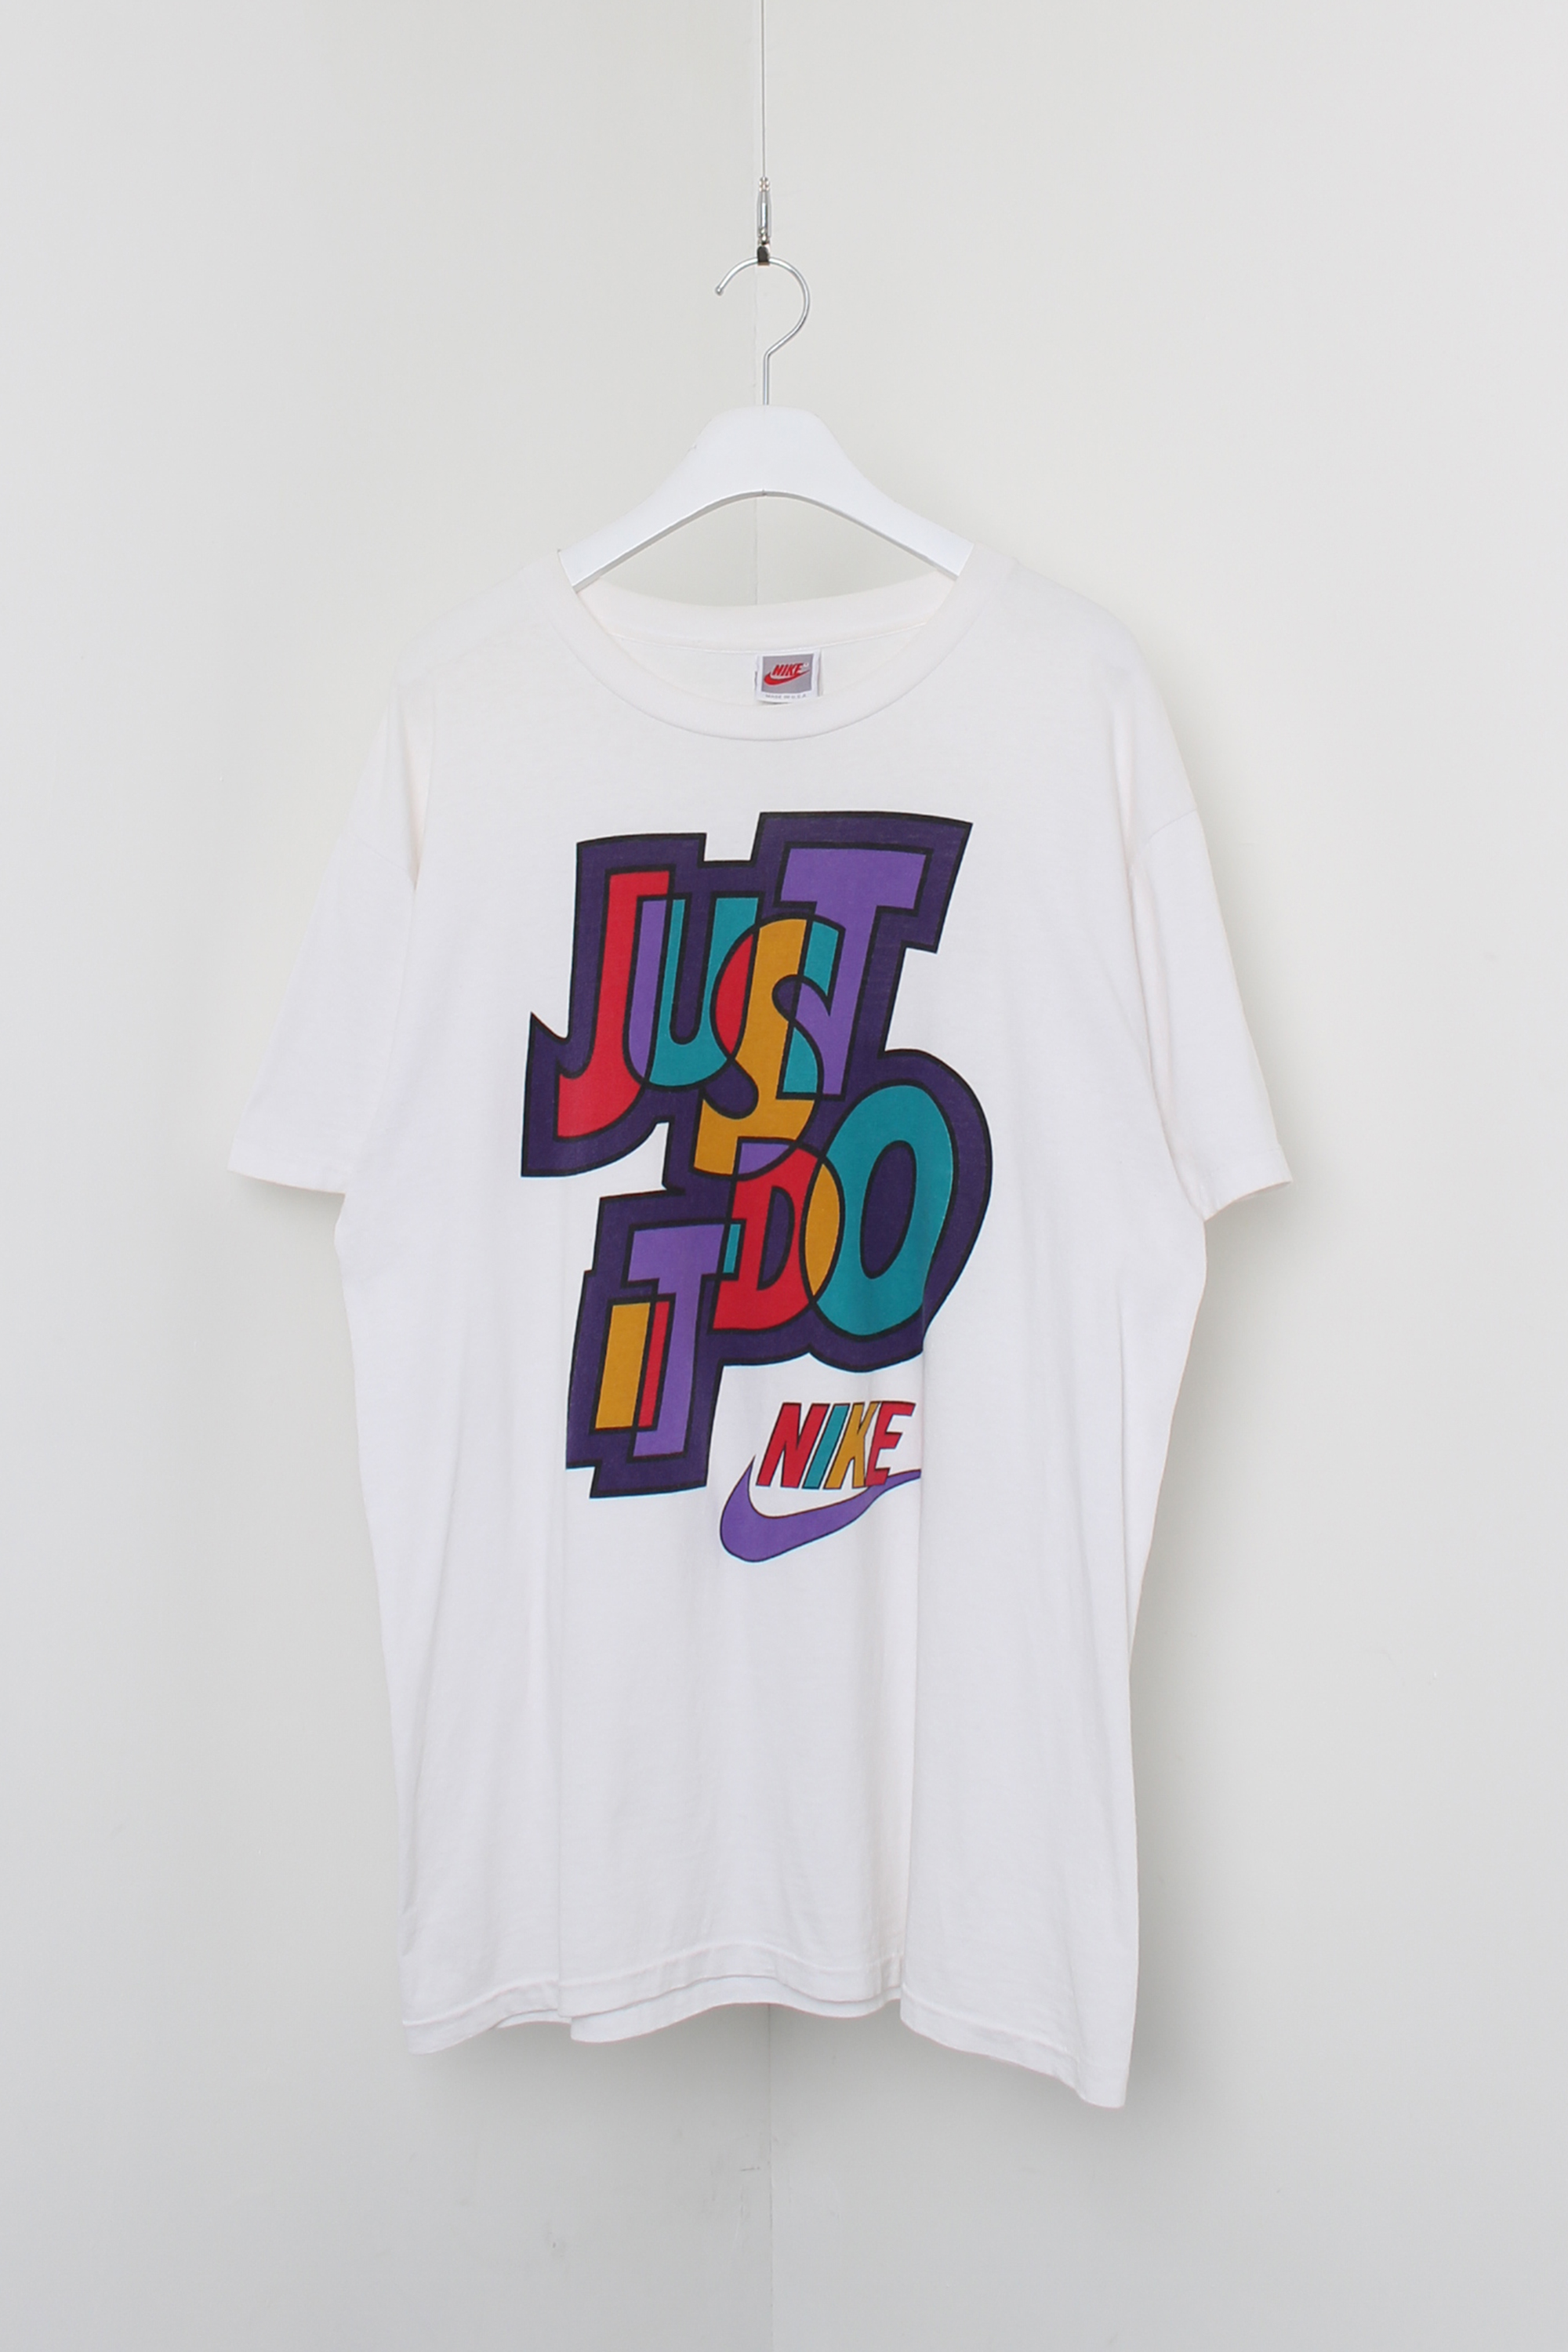 vintage Nike t-shirt (made in usa)